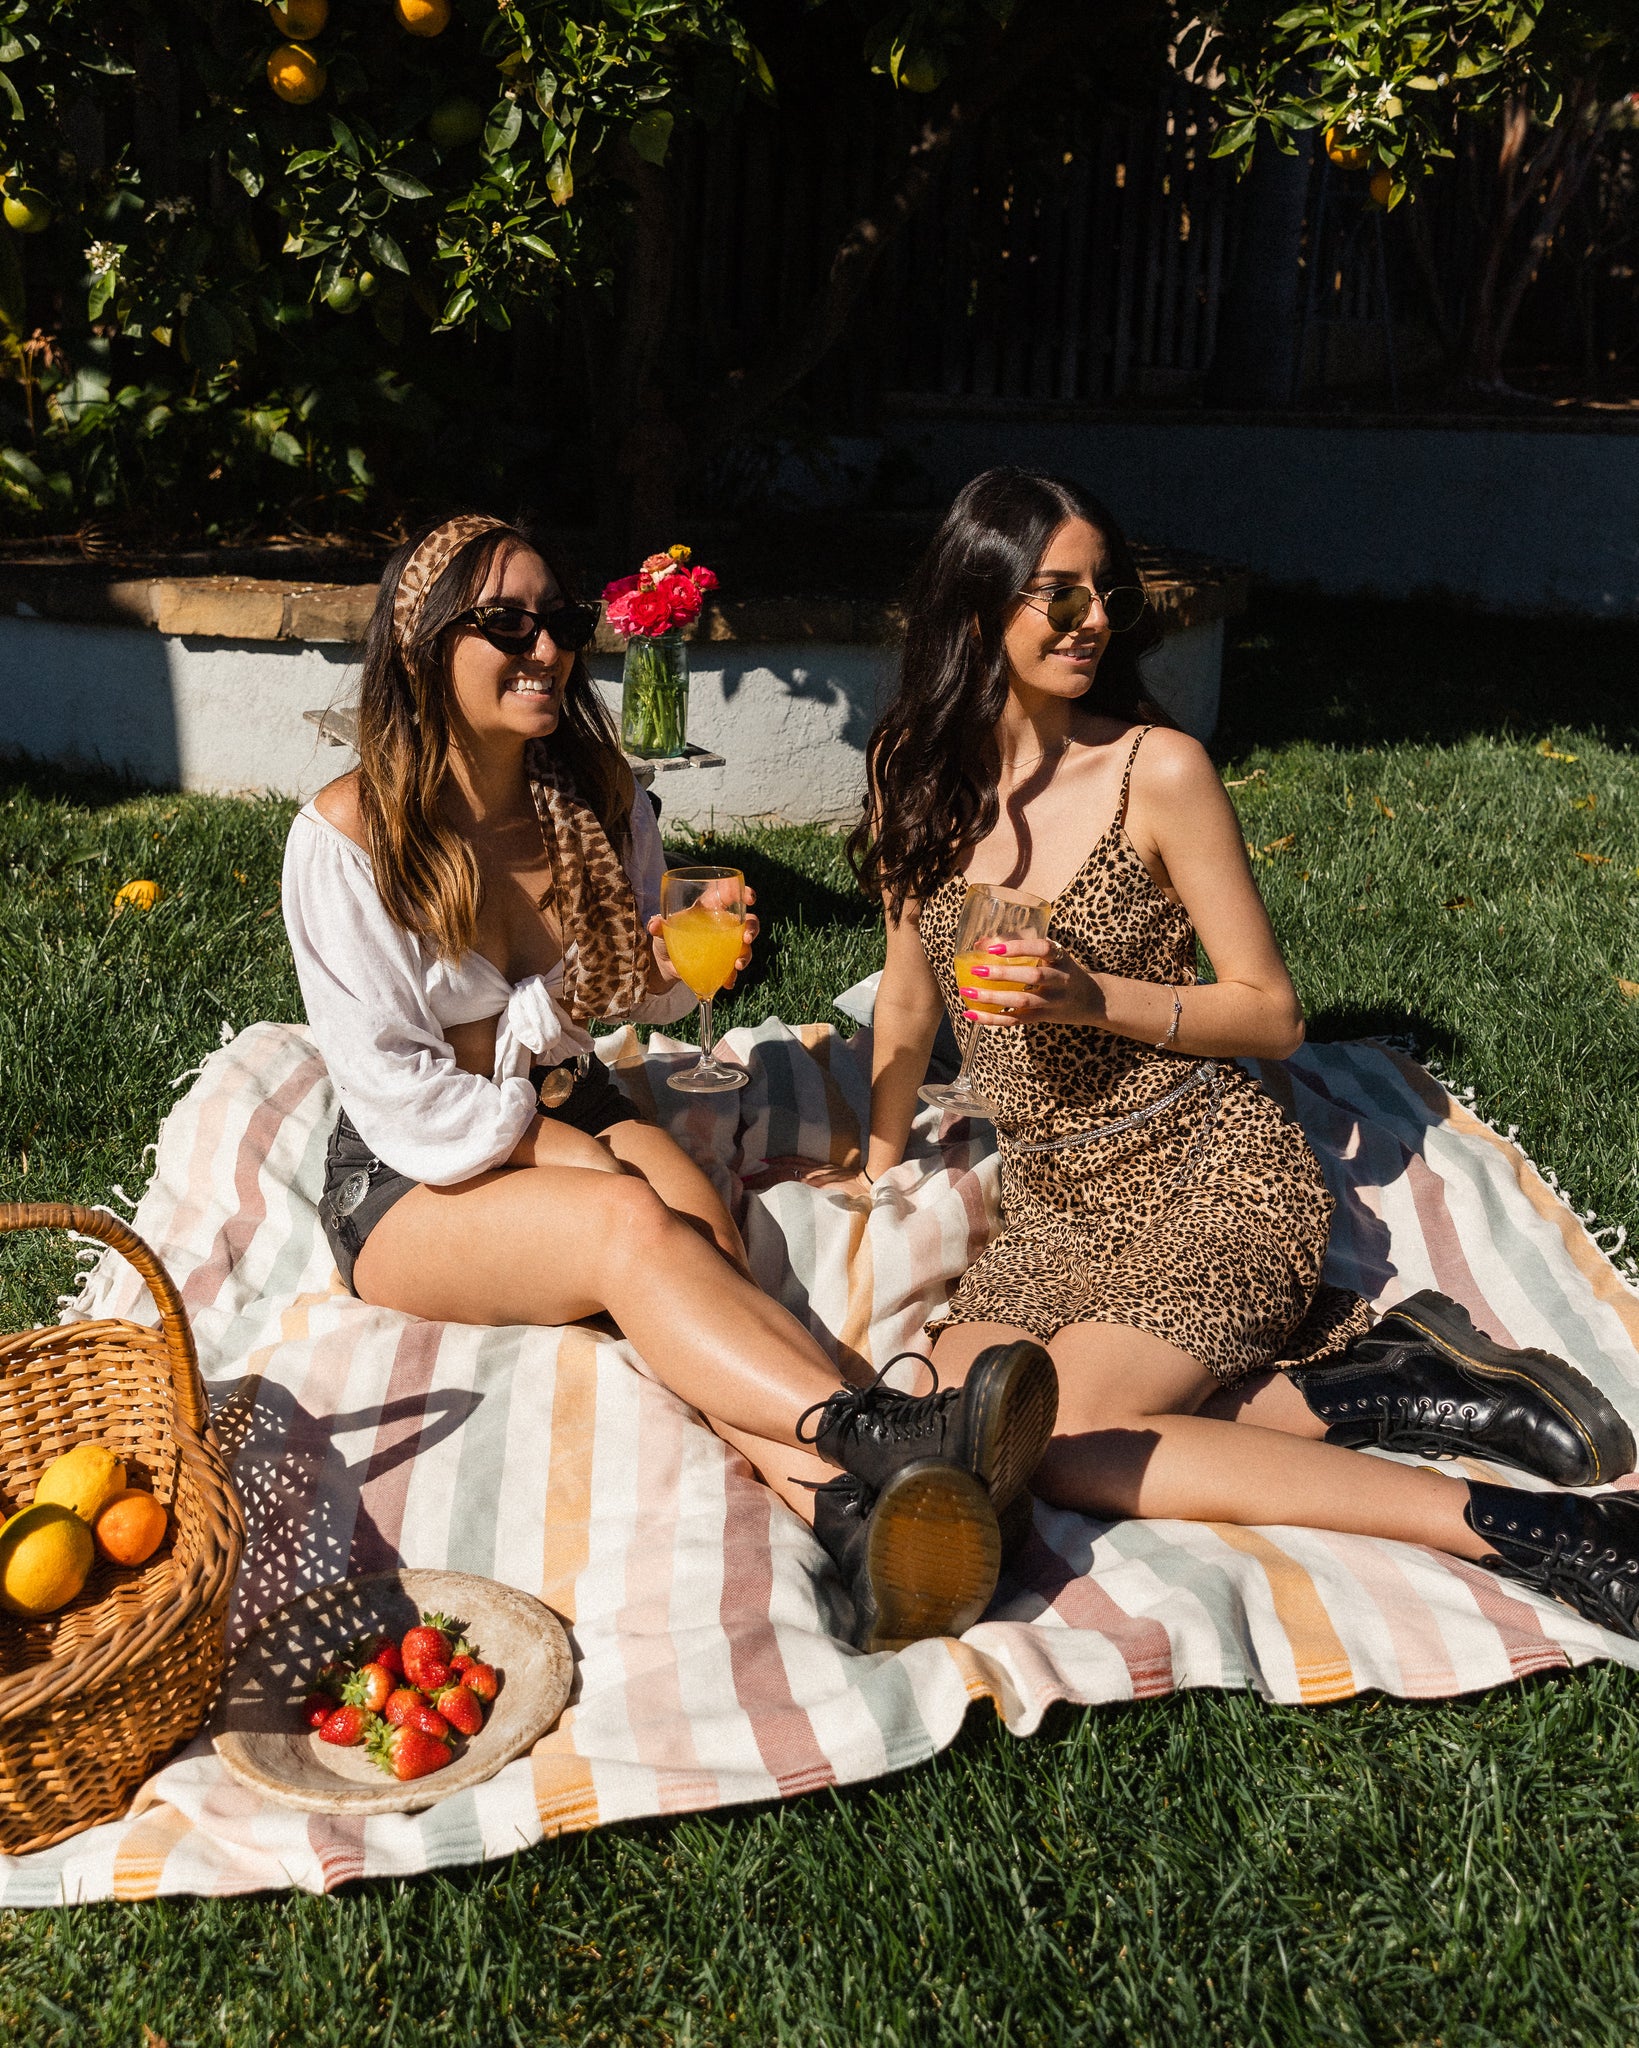 Why Our Towels Make for the Perfect Picnic Blanket